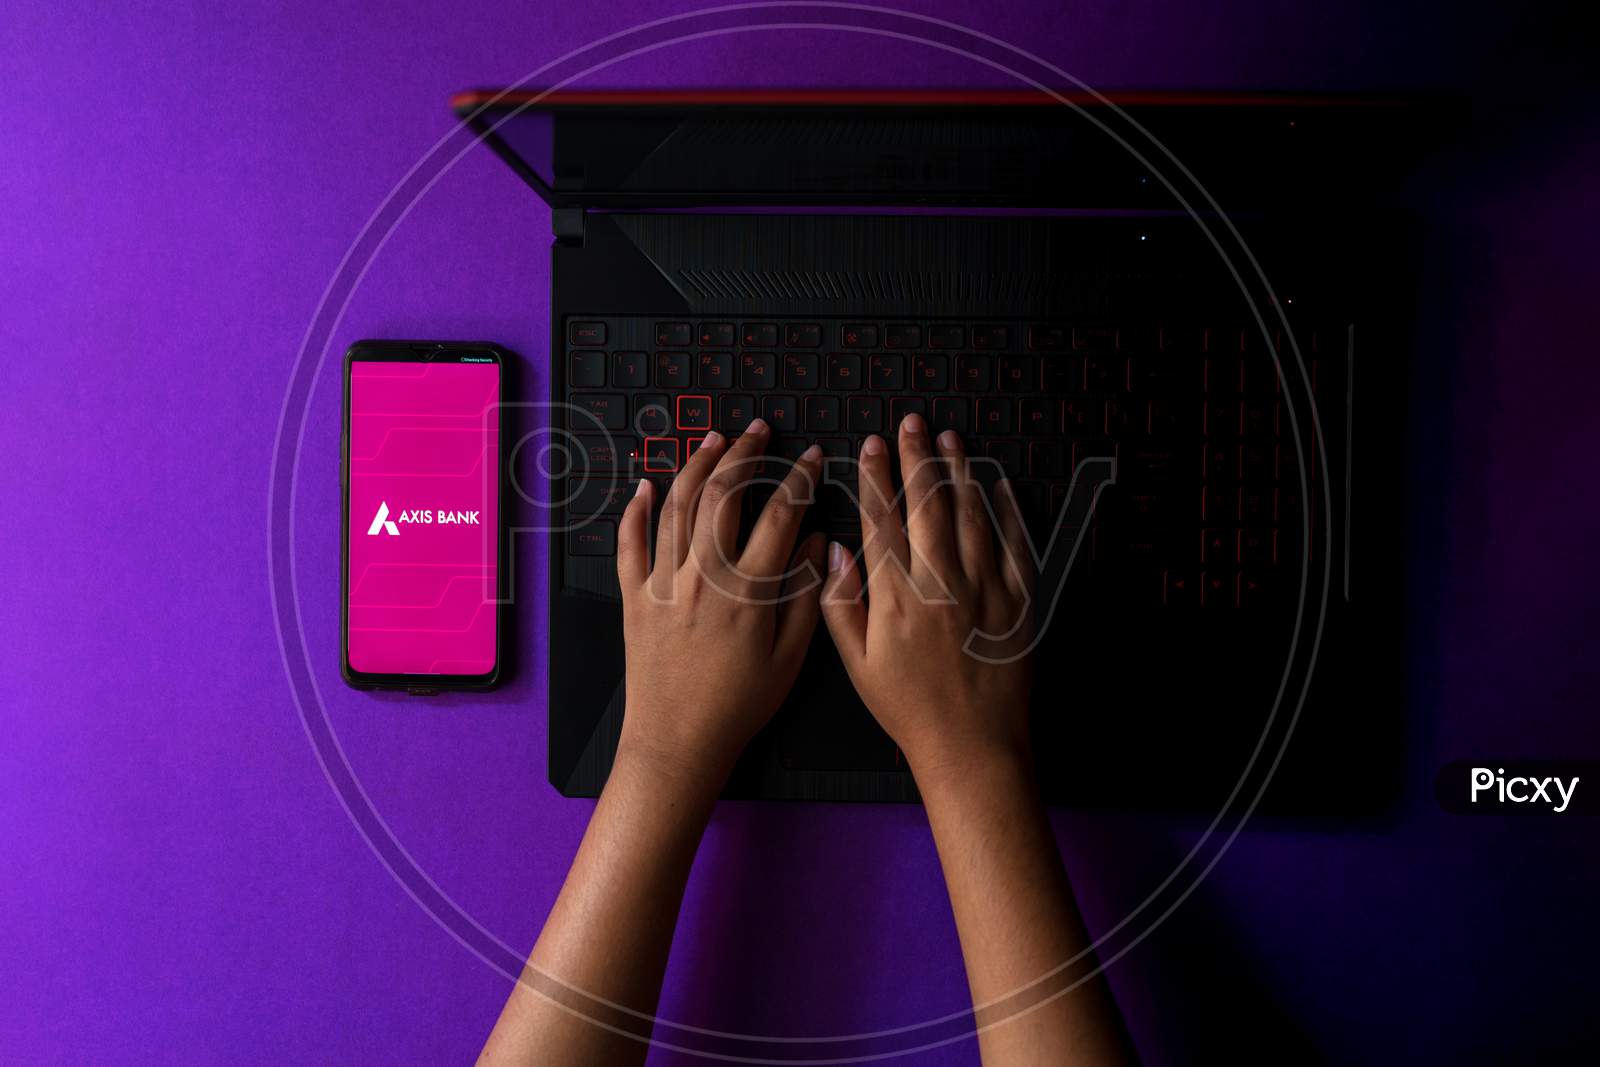 Axis Bank app displayed on a smartphone while working from home